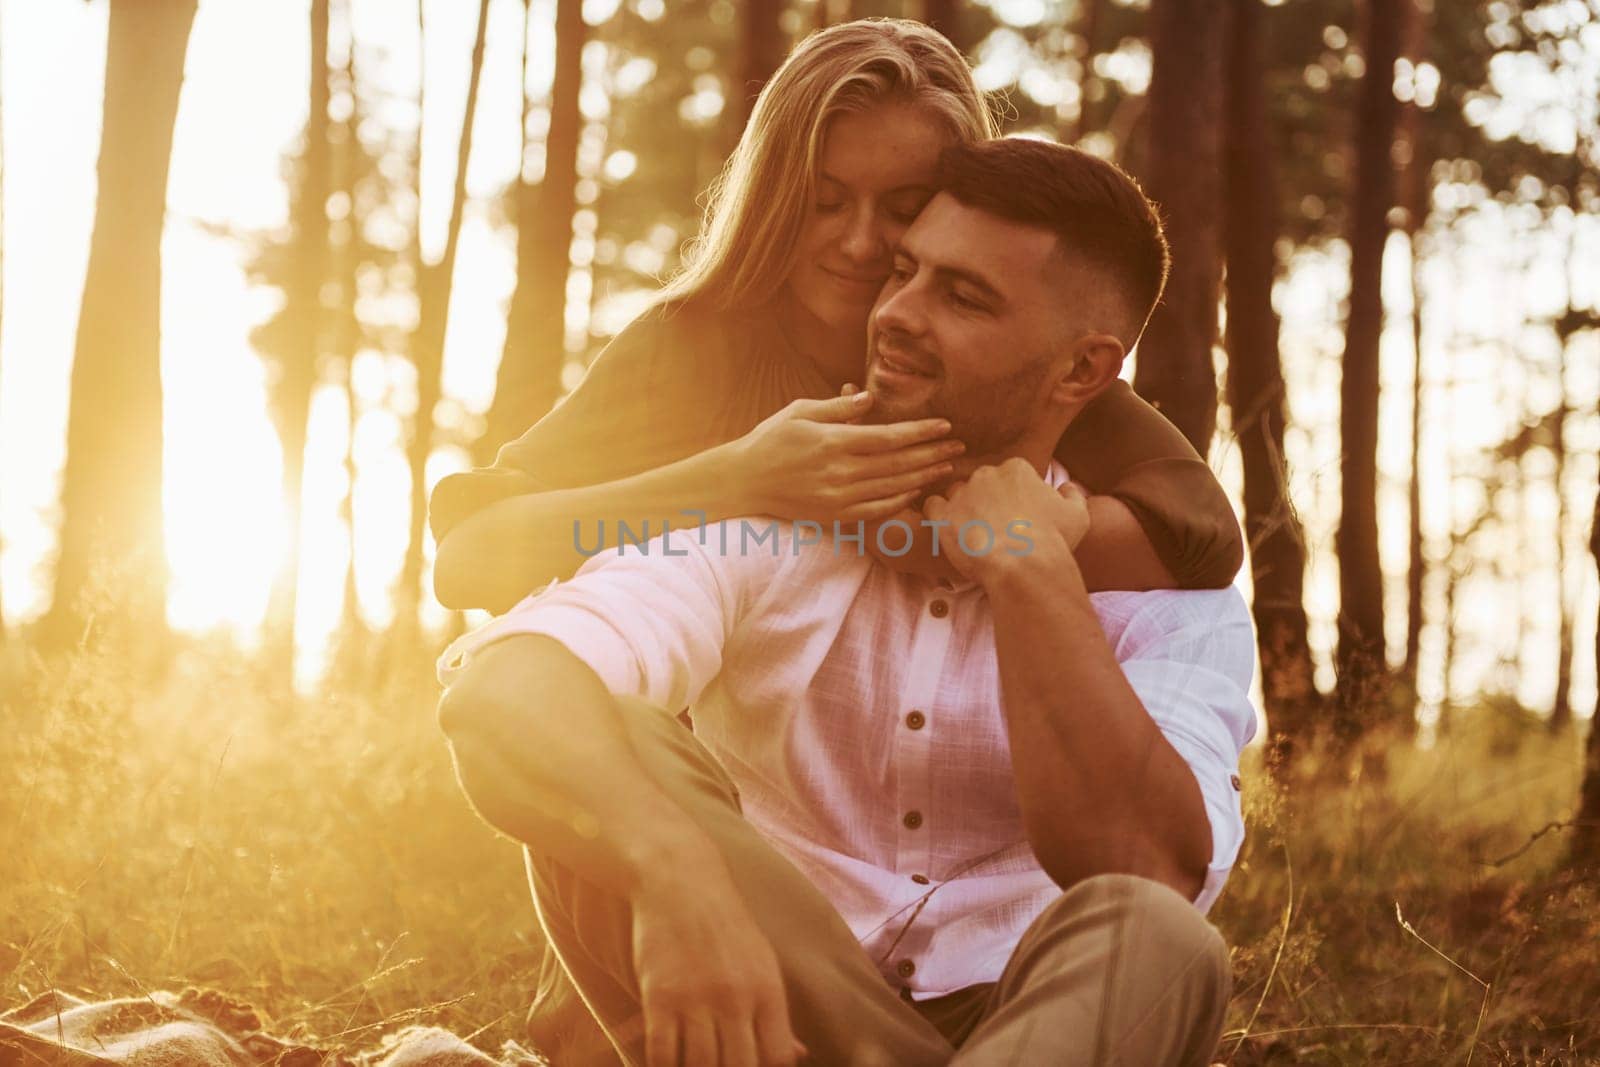 Sitting on the ground. Happy couple is outdoors in the forest at daytime.